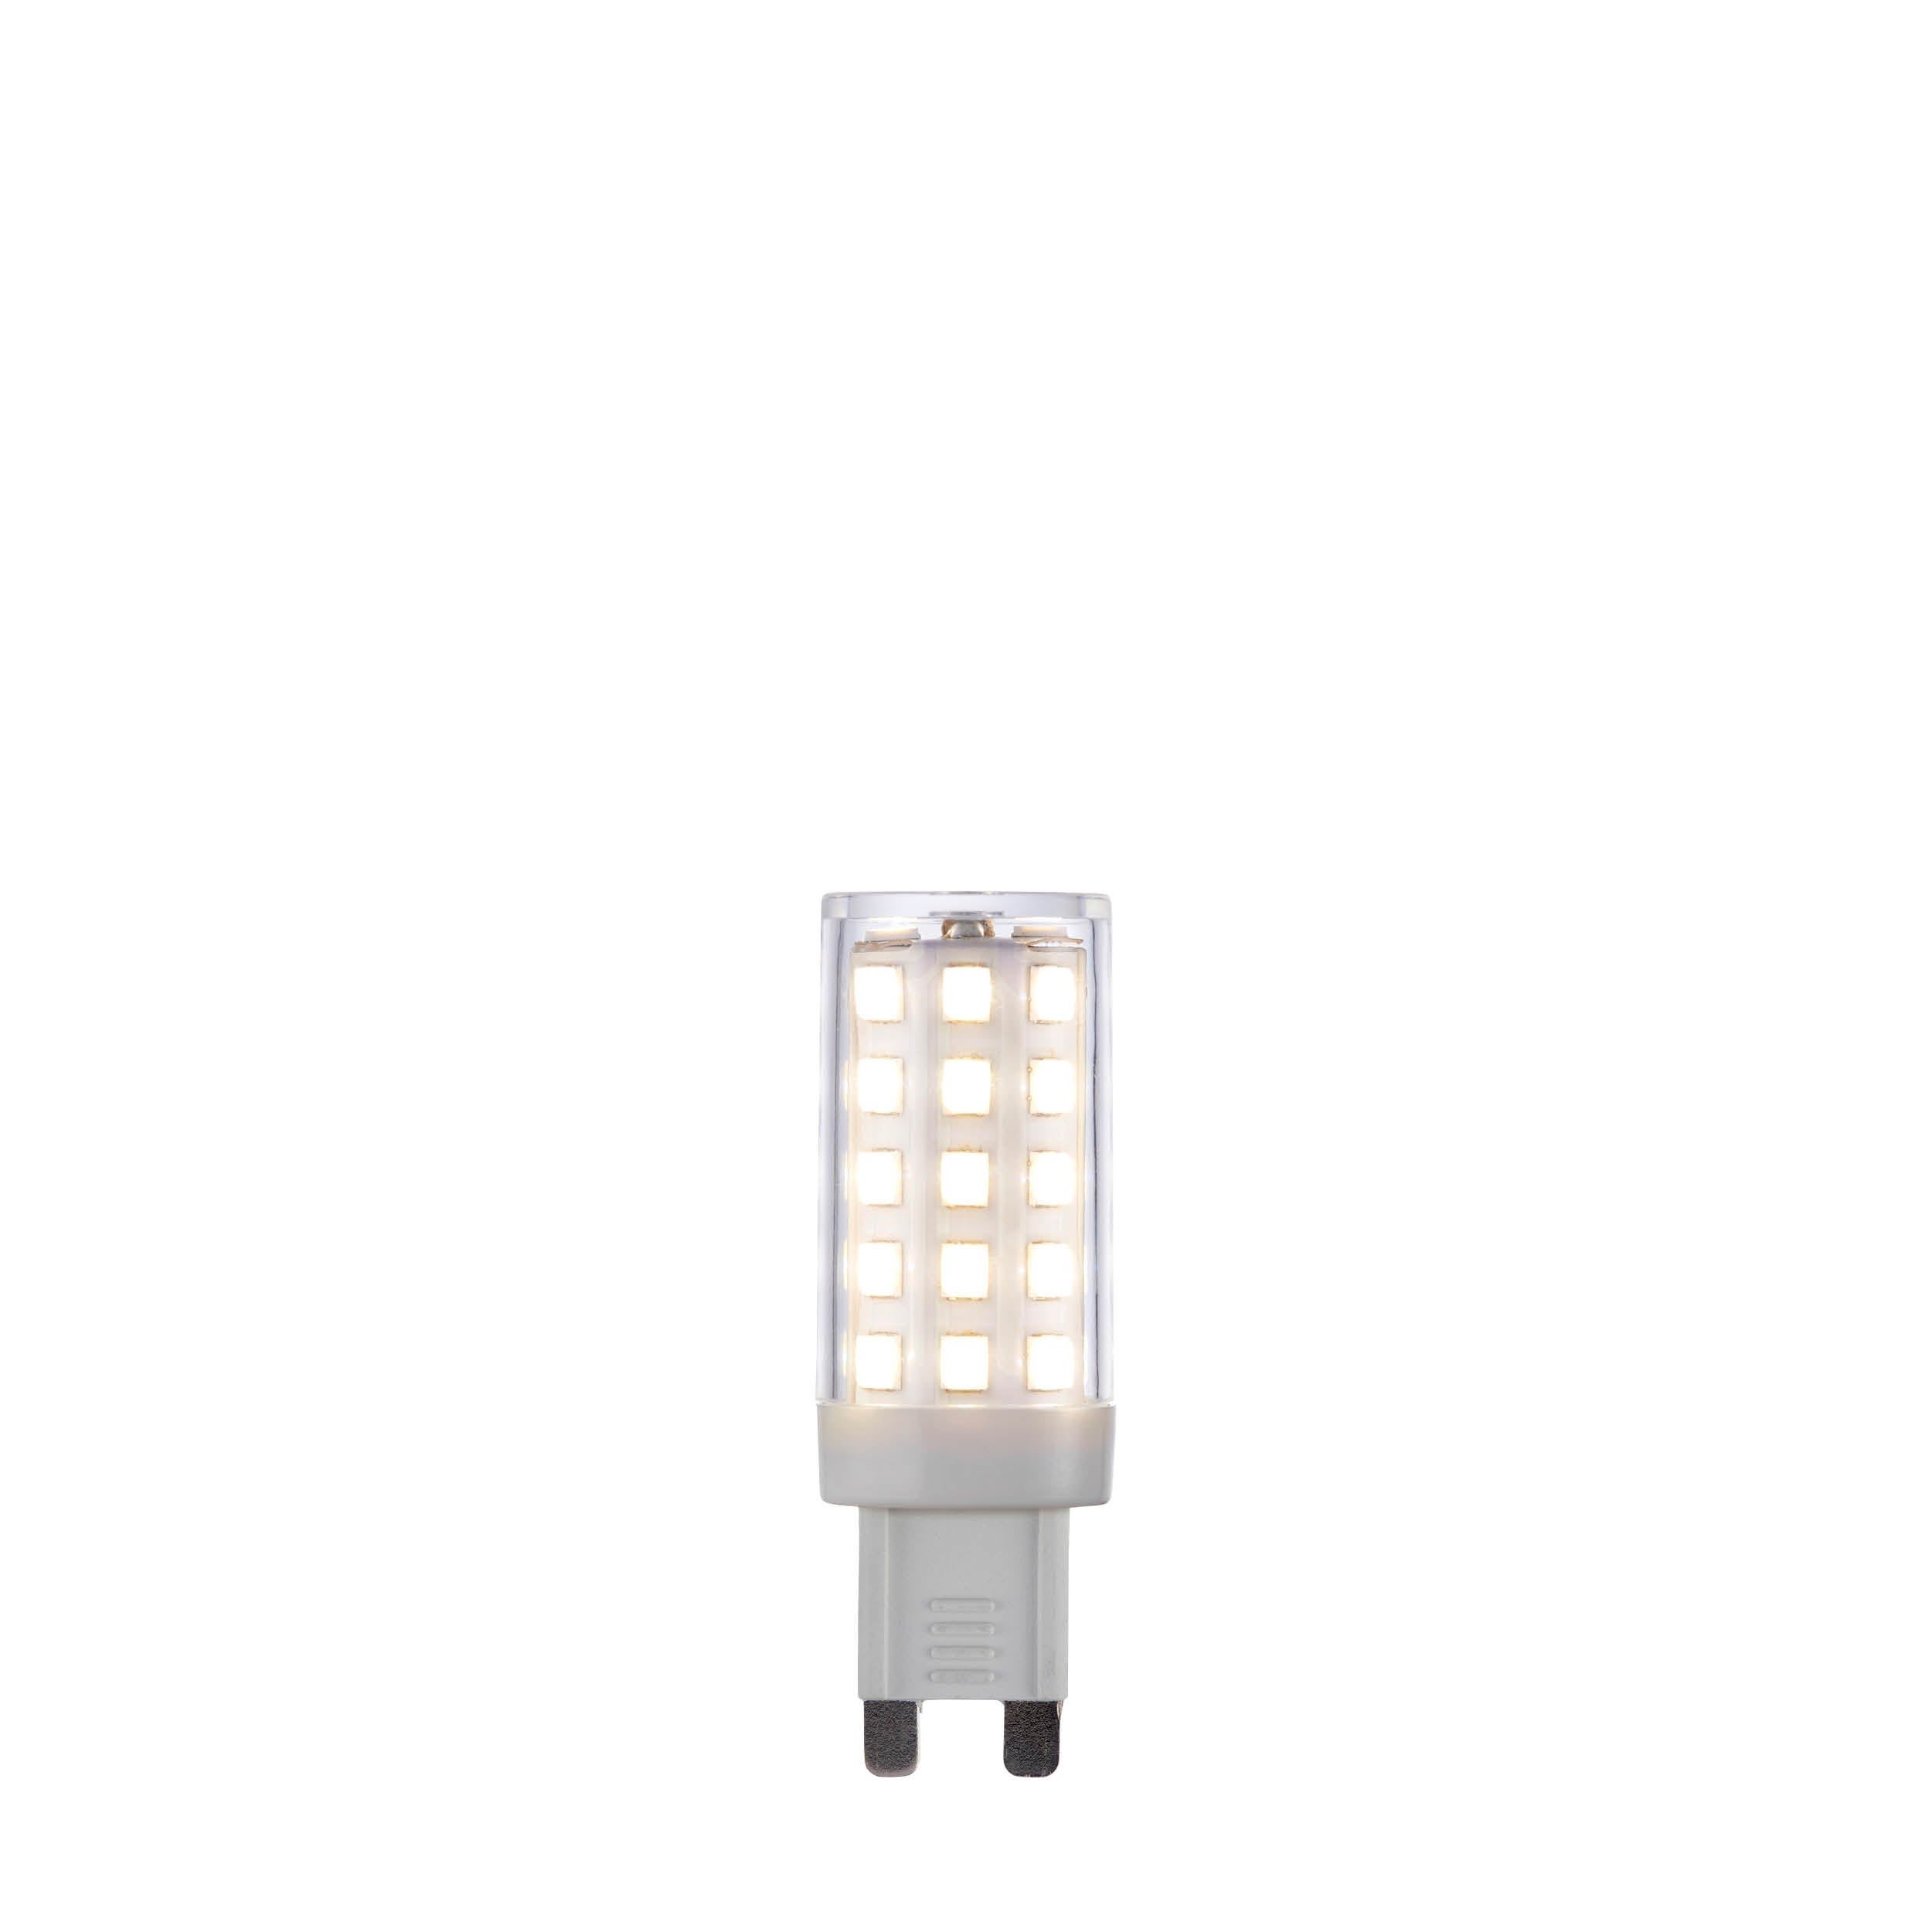 G9 LED bulb capsule. Cool White 4000K 4.8W 470lm. Dimmable